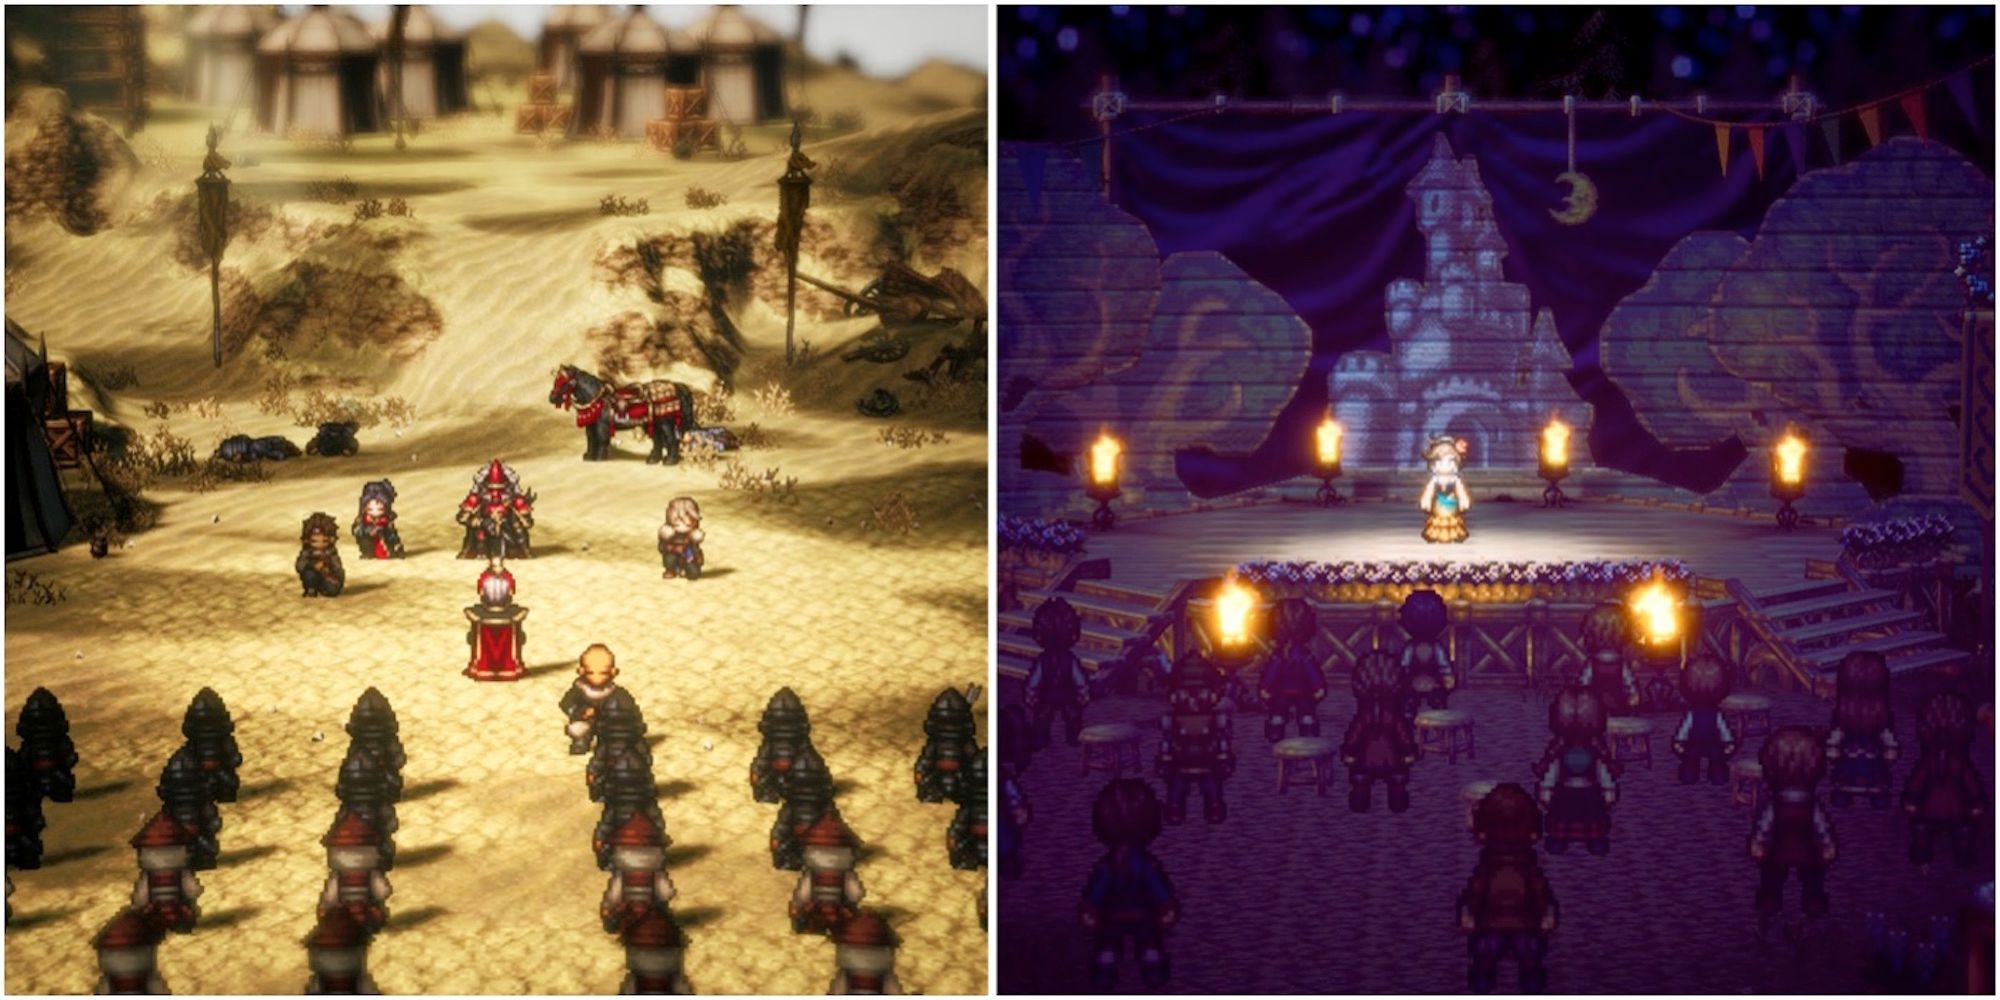 Cutscenes from Hikari’s and Agnea’s story in Octopath Traveler 2